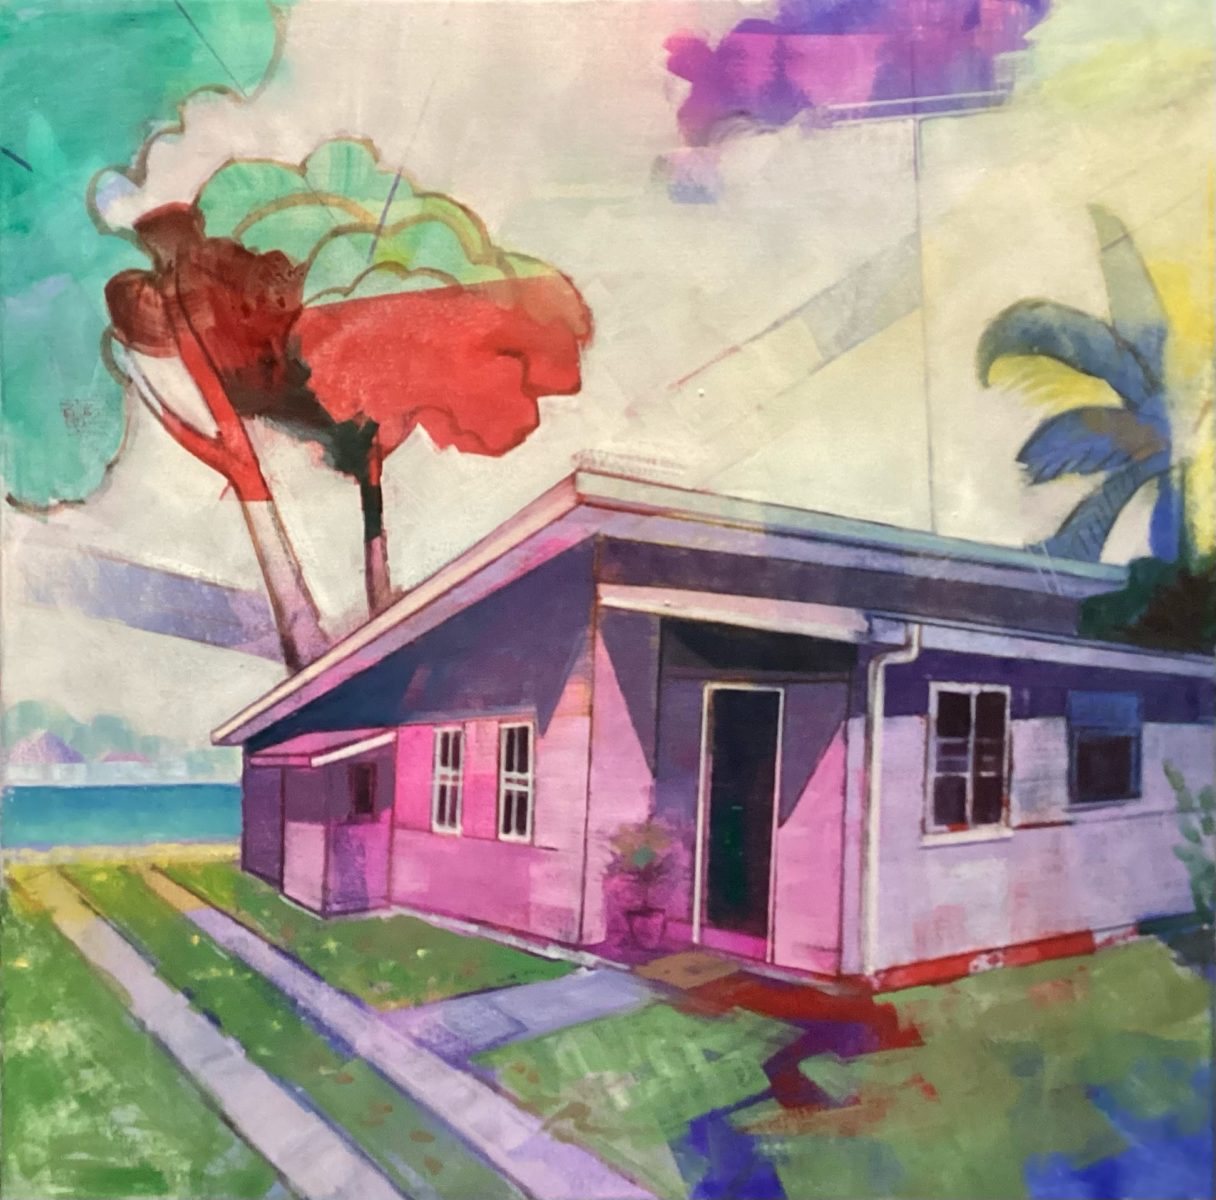 Pink house by the sea 2023 | Nick Olsen | oil on canvas | 50 x 50 cm, framed in lime-wash shadow box | $2200